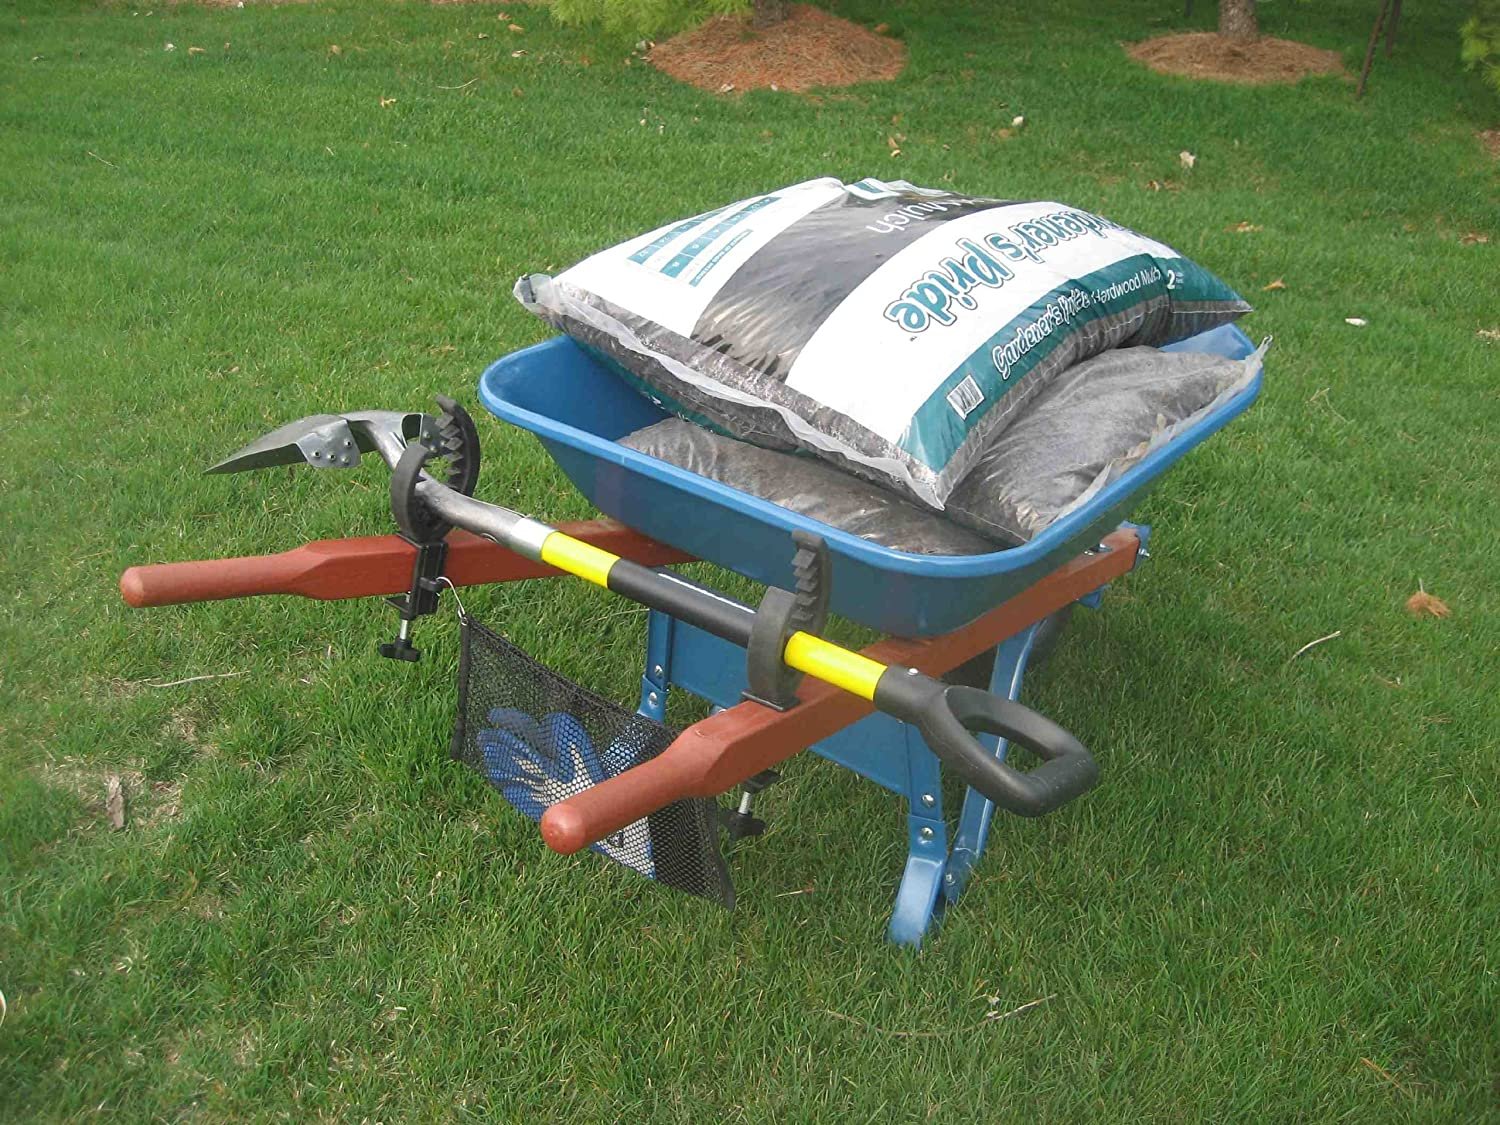 Grizzly Grip Wheelbarrow Tool Holder with Mesh Bag, Secures Tools To Wheelbarrow - image 1 of 5